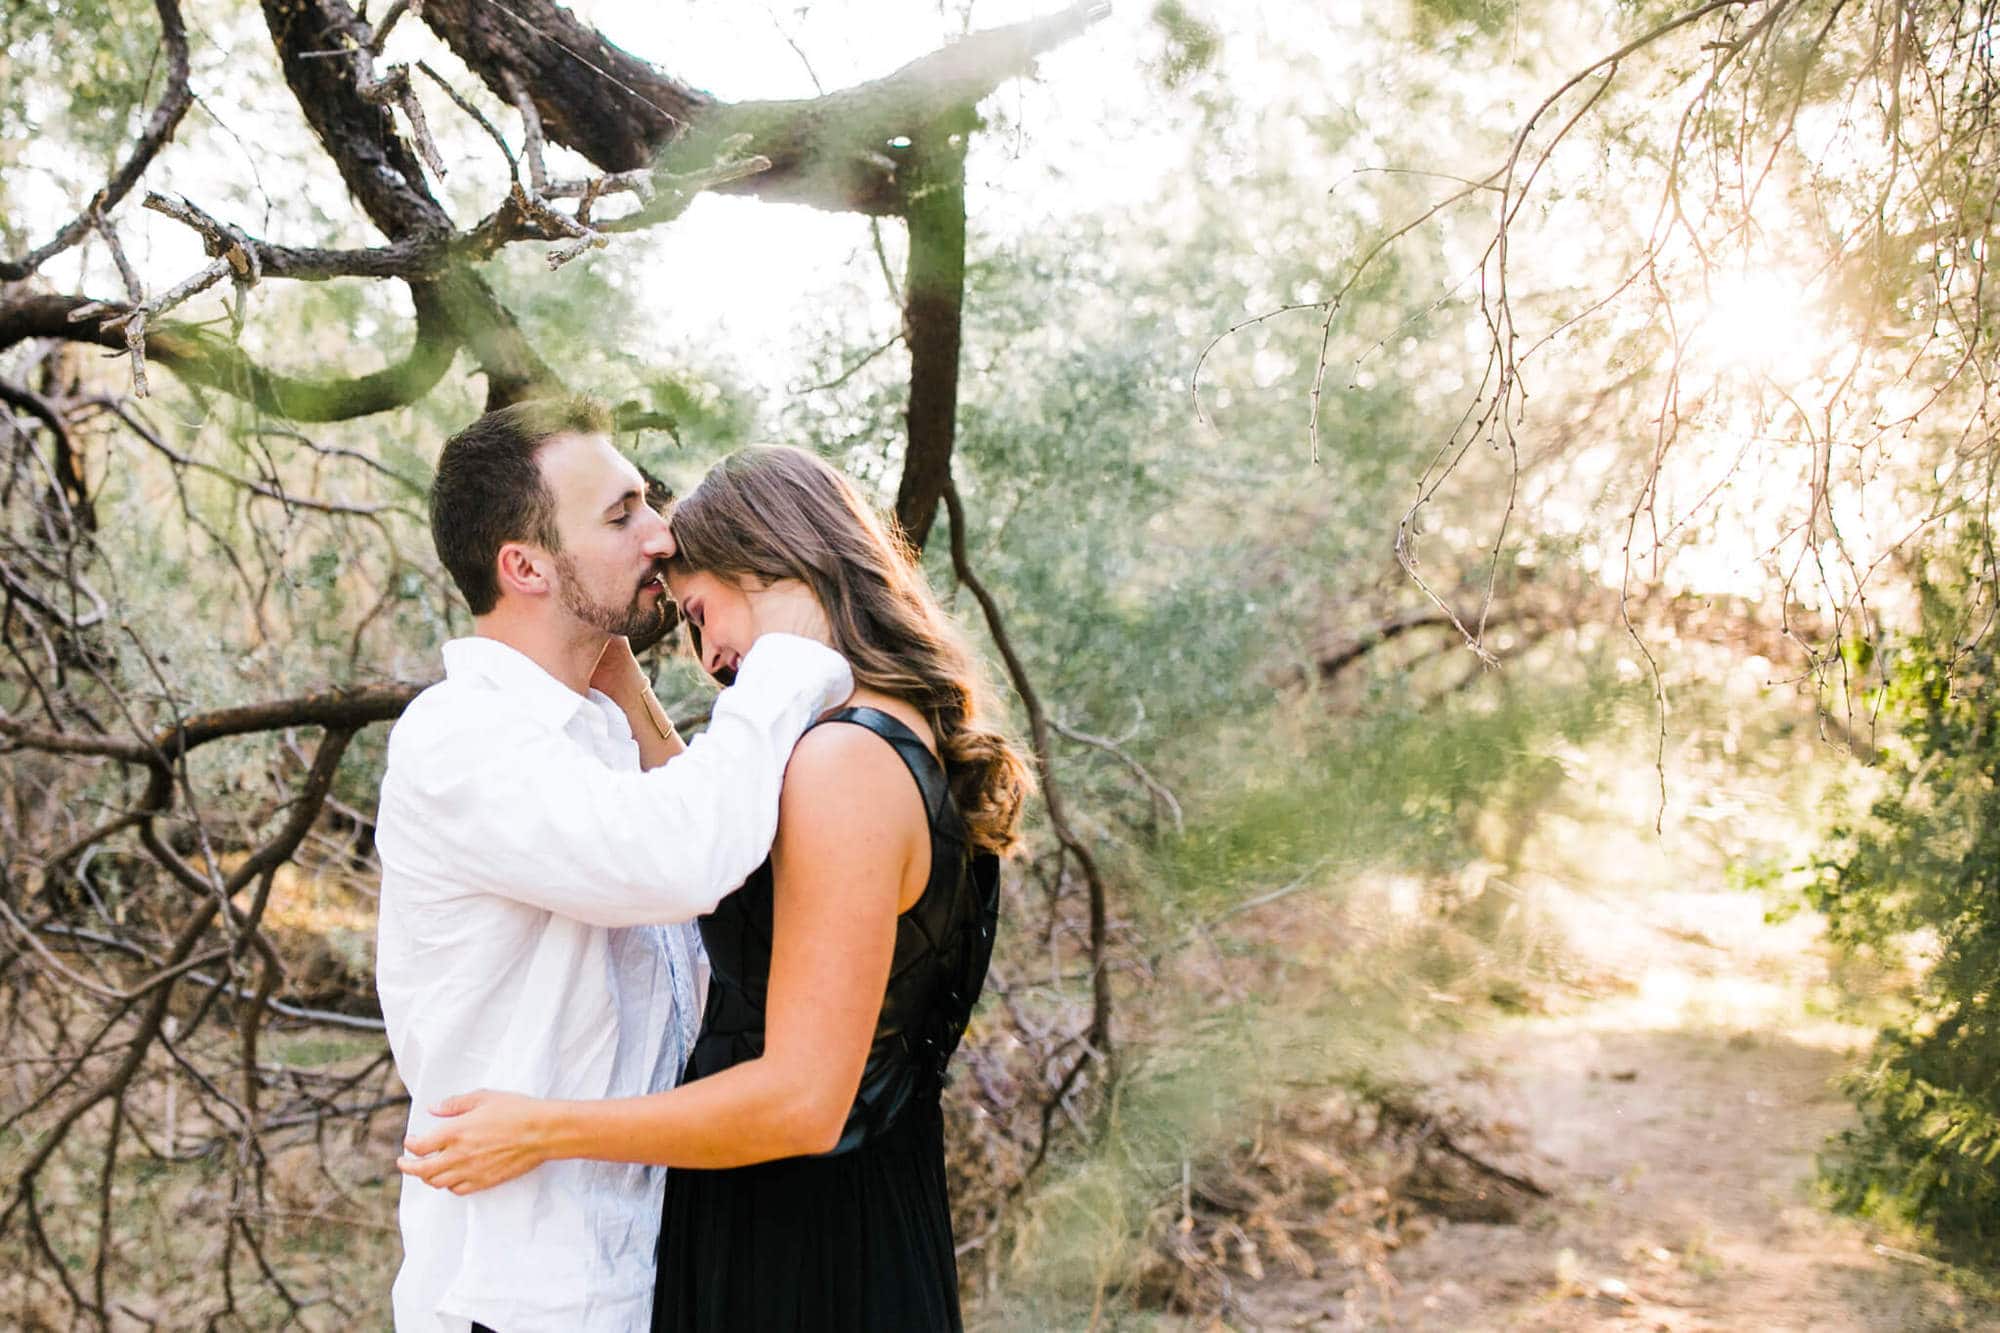 As an arizona elopement photographer I love exploring the desert with my couples. This sunset desert oasis shoot with Nicole + Logan was a freaking dream